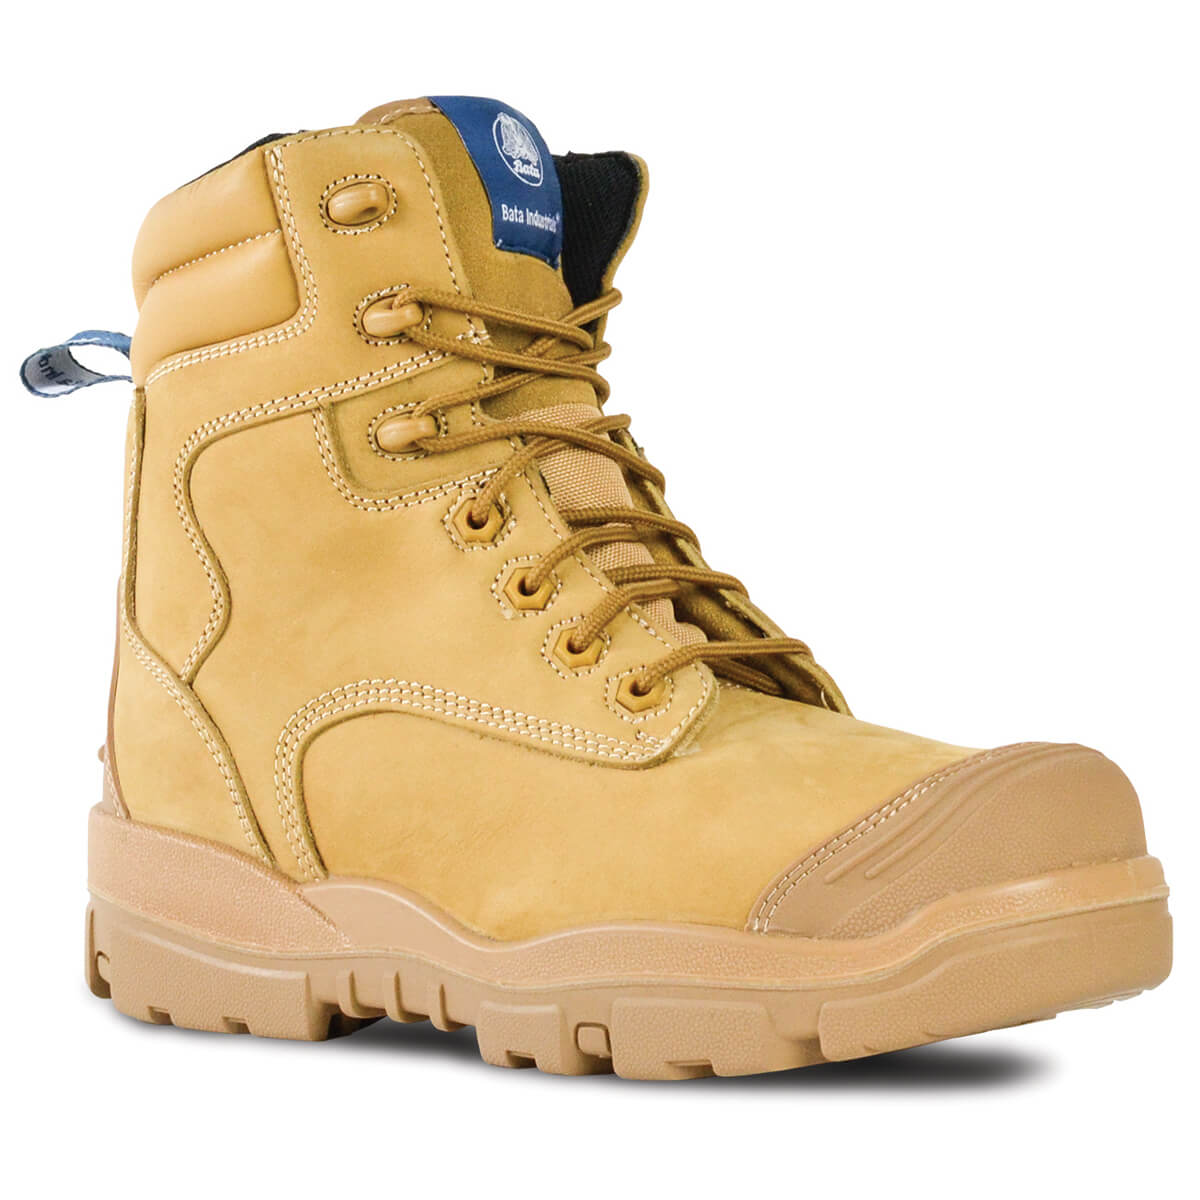 Bata Longreach Zip Side Thermal Safety 